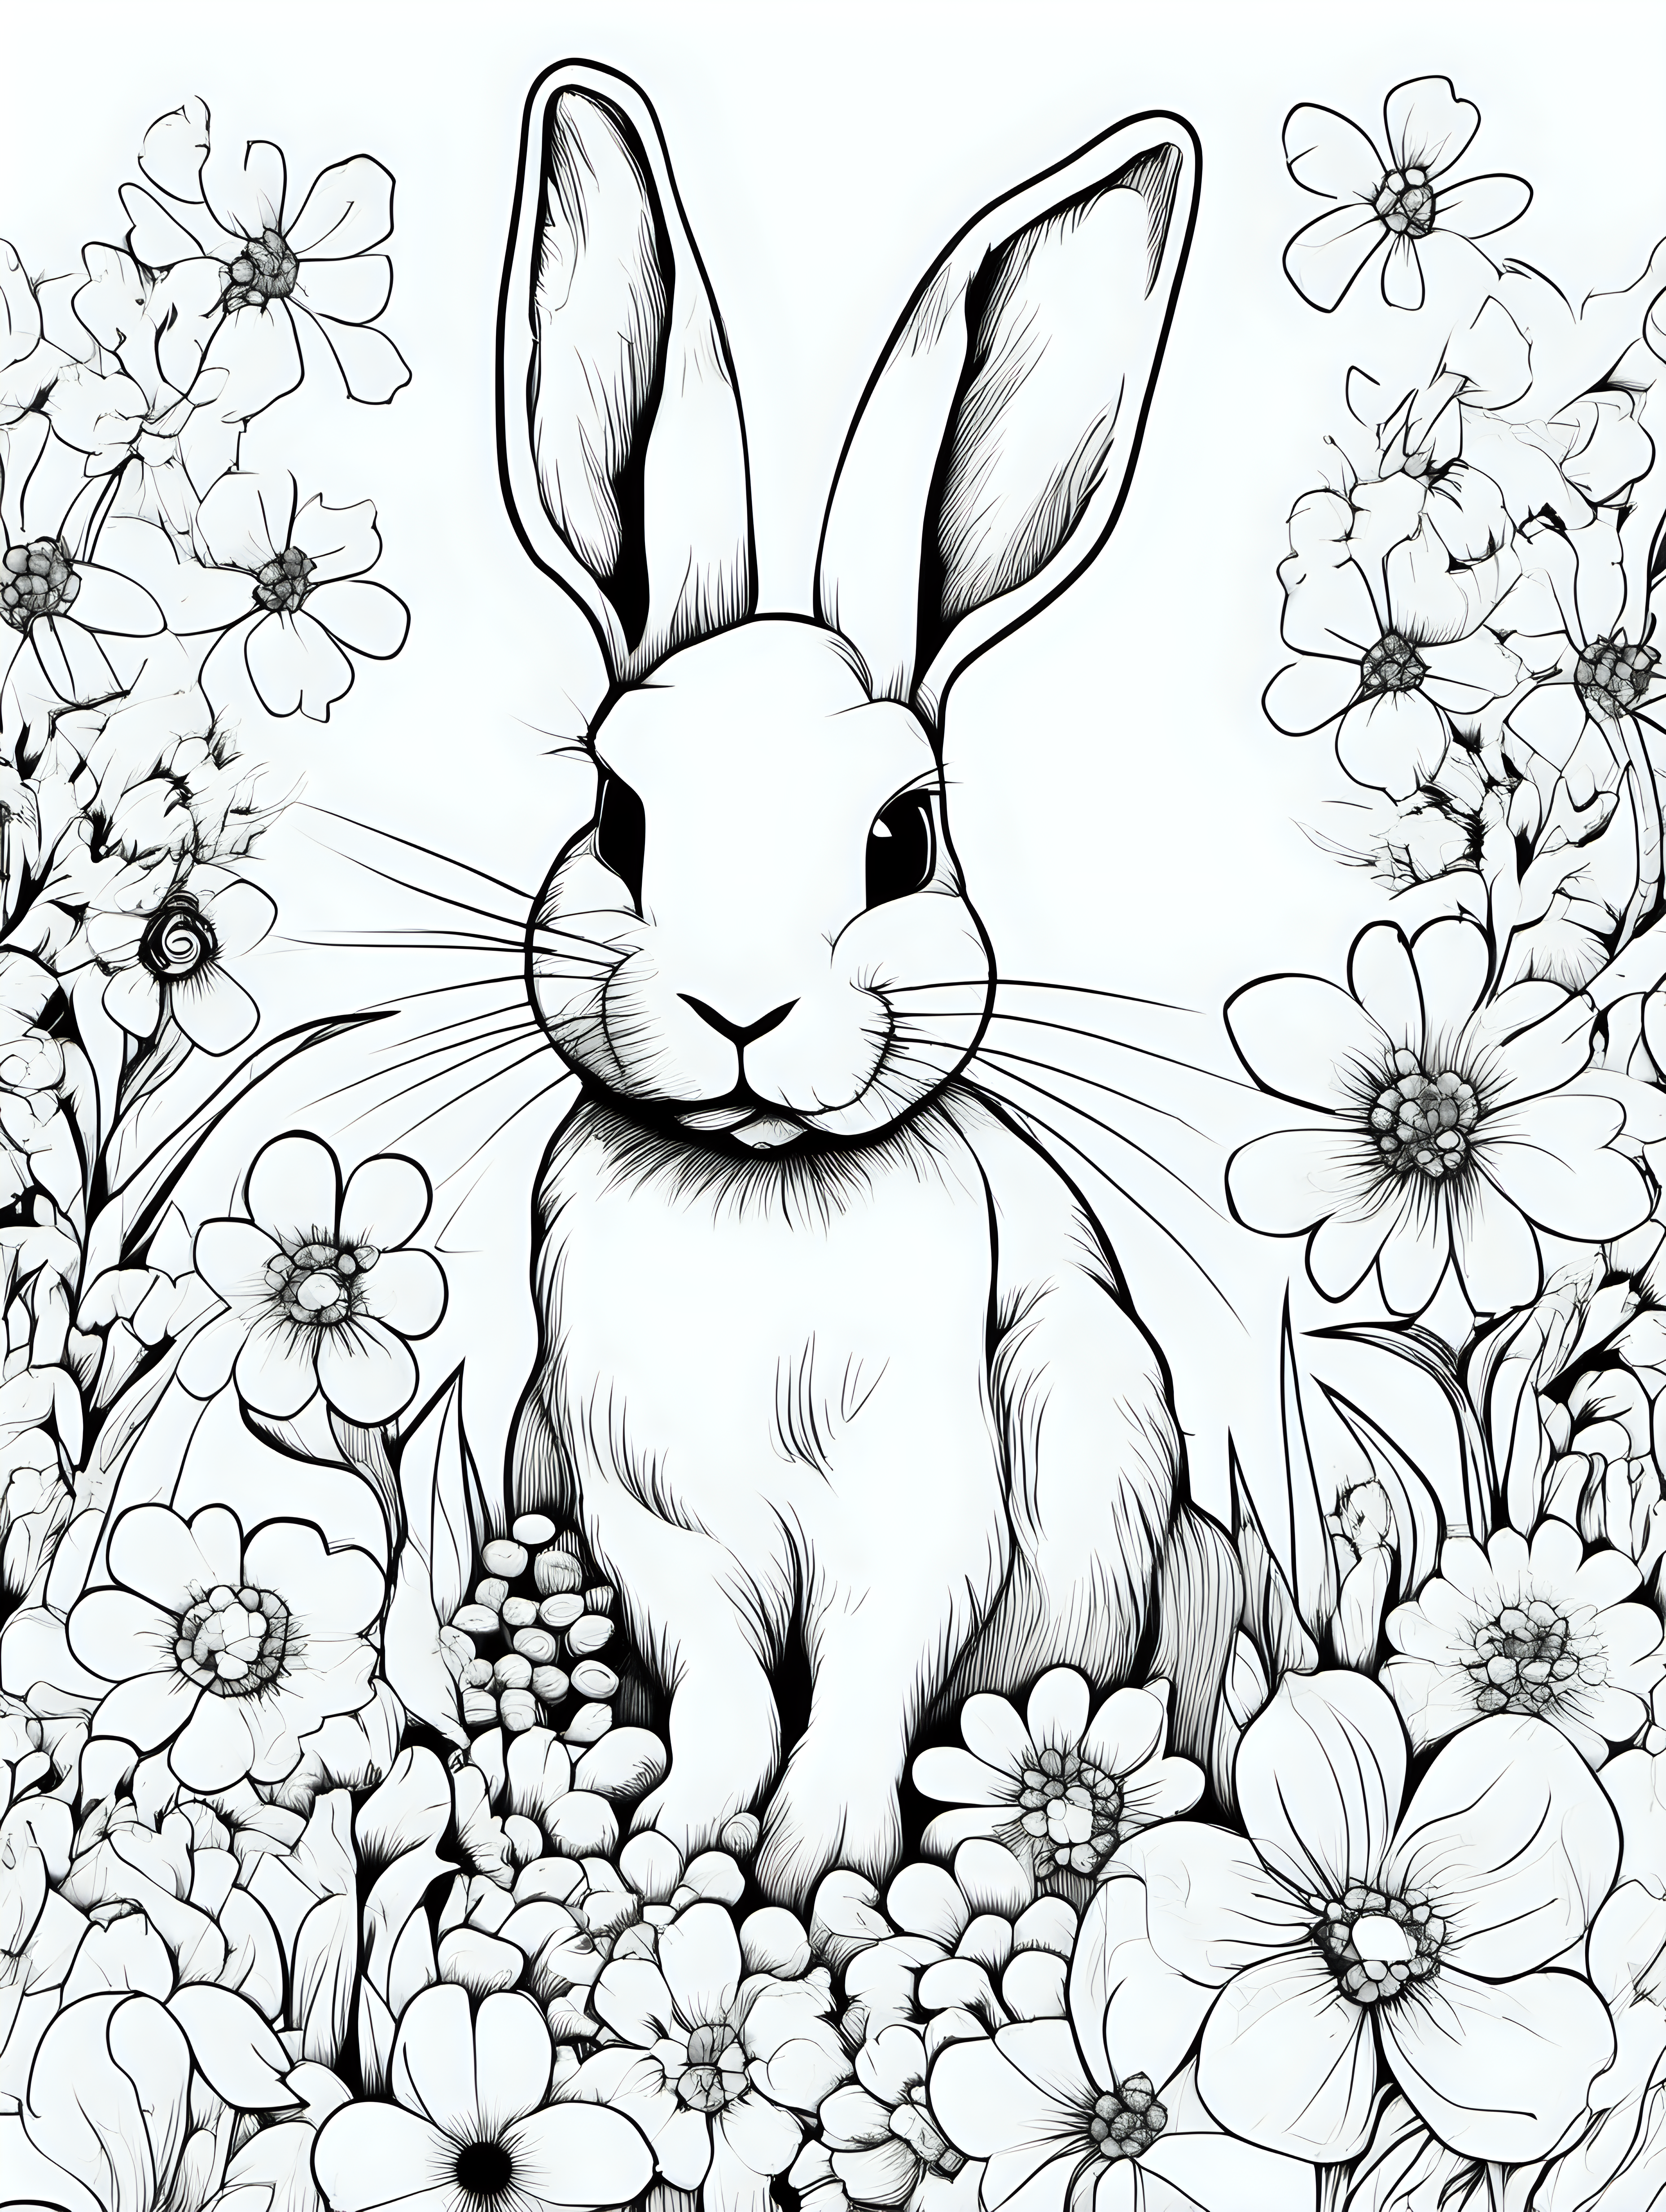 rabbit covered in flowers simple draw no colors